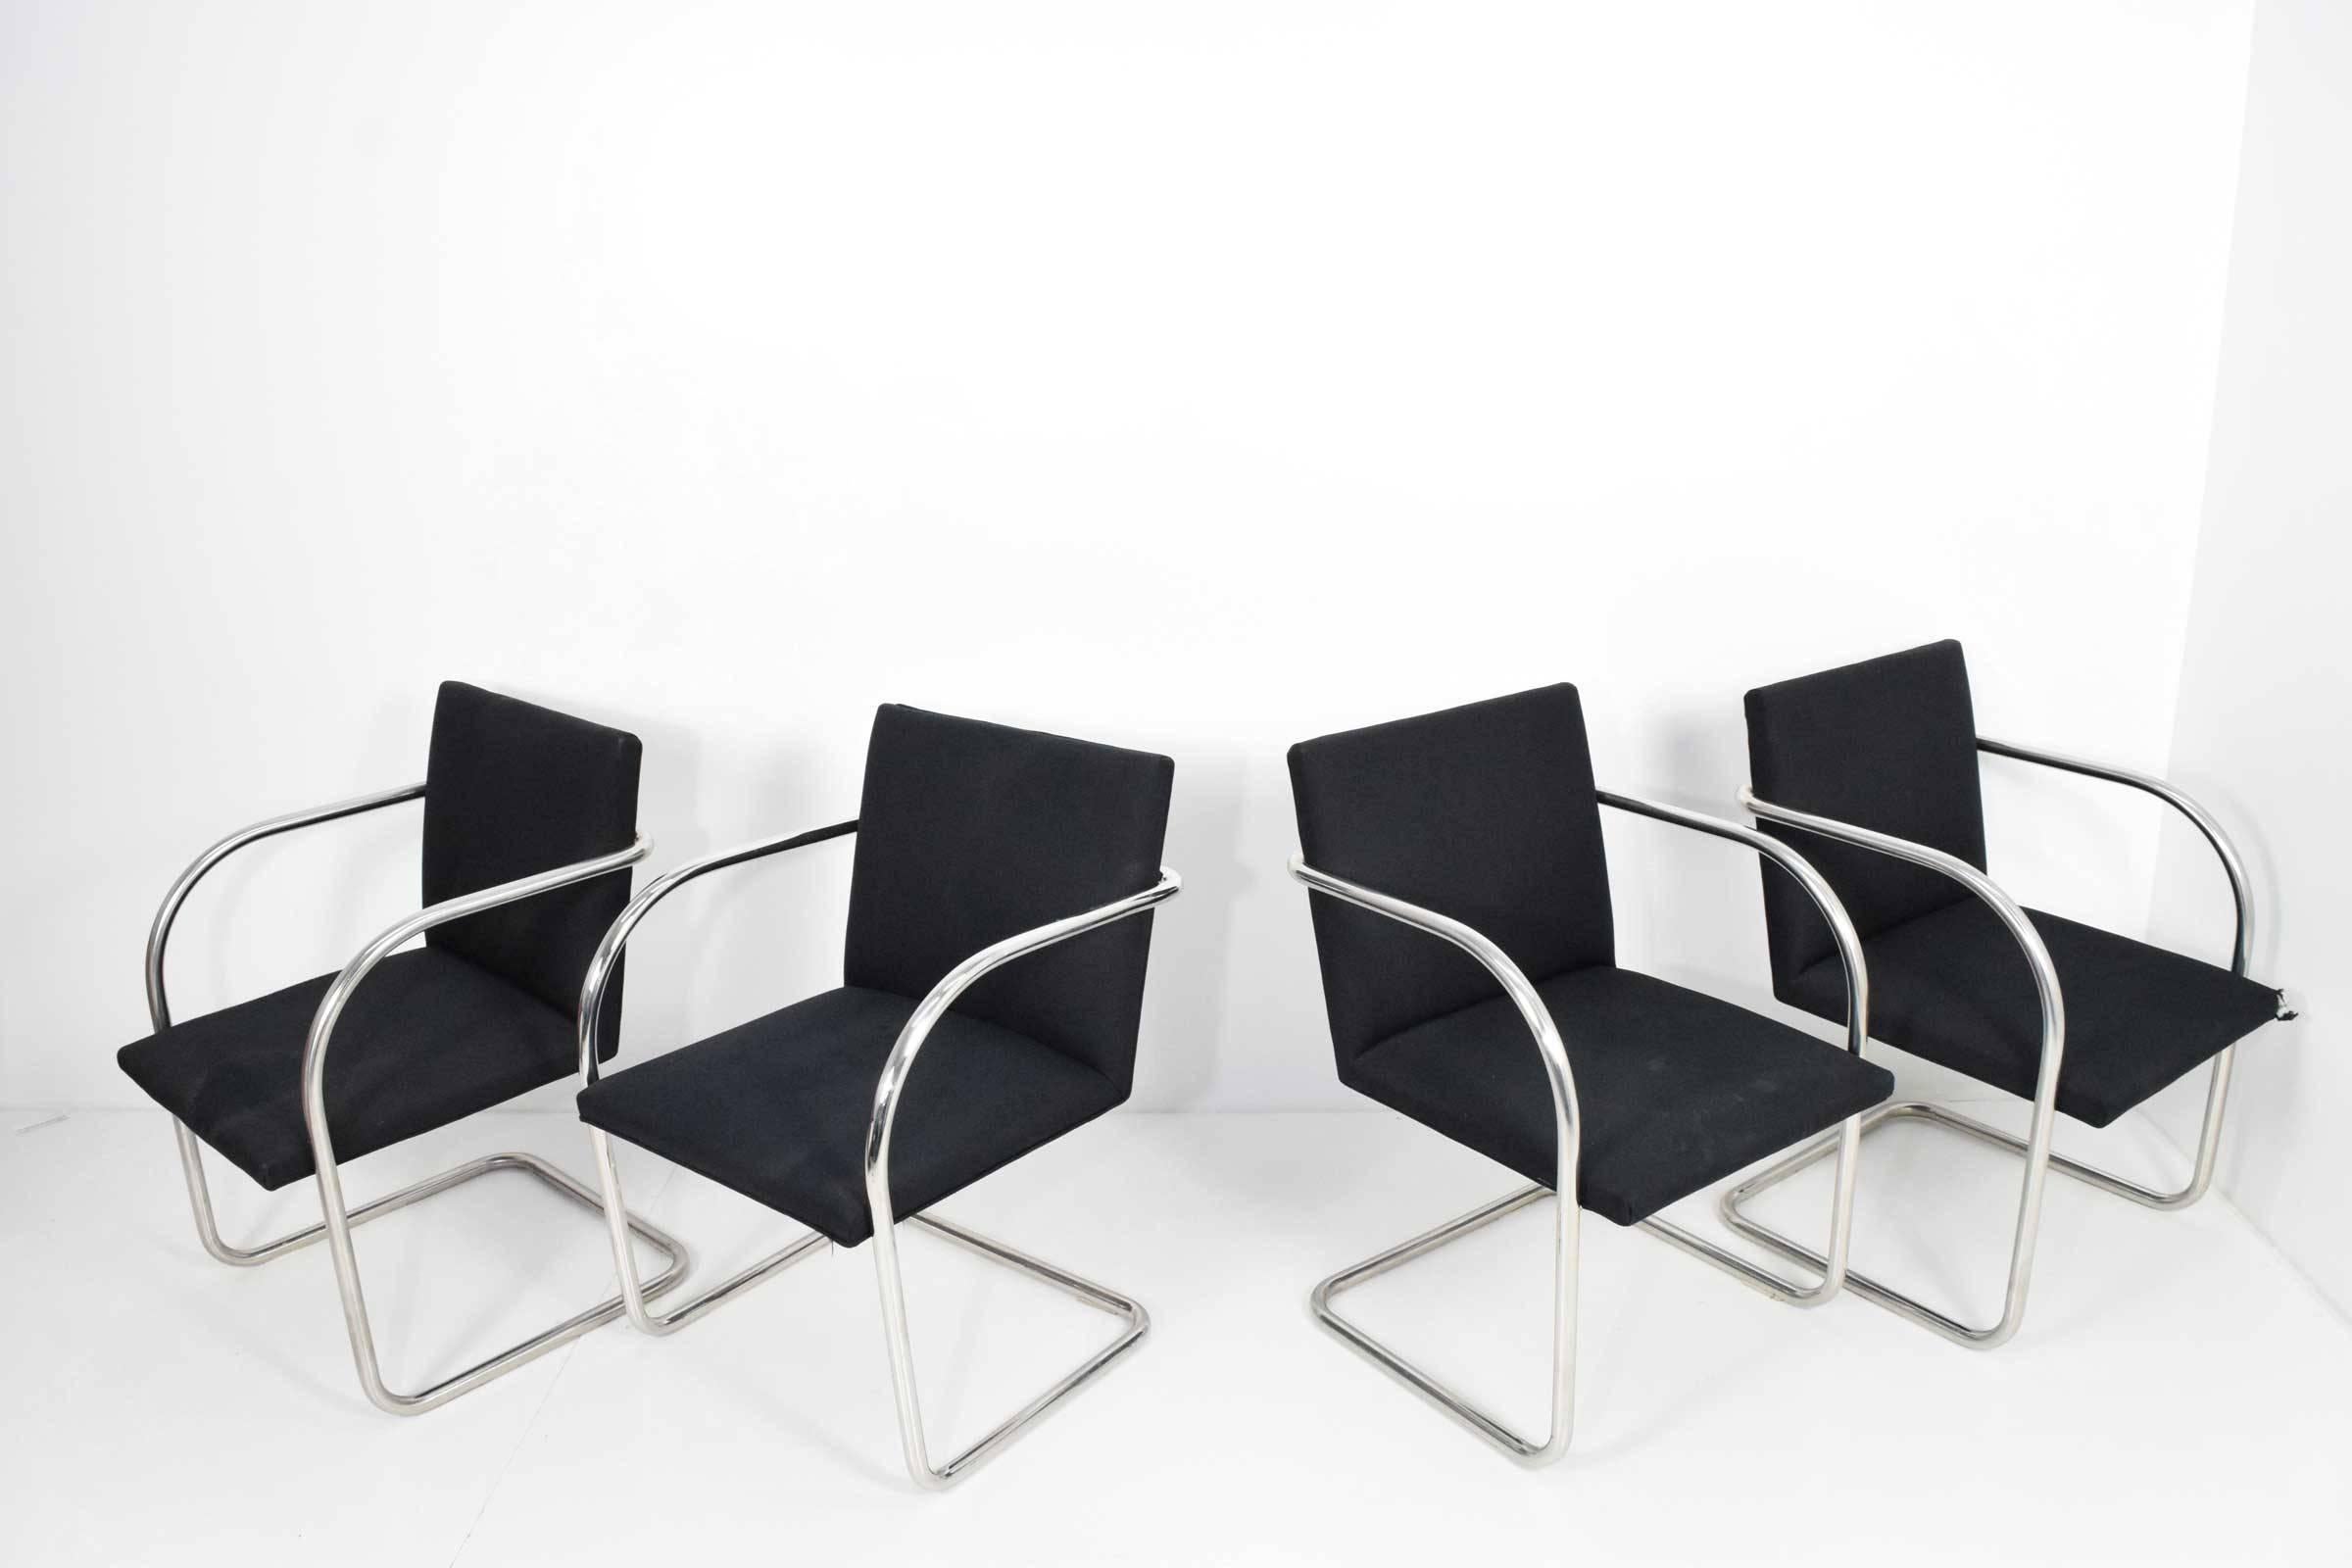 Set of four Brno chairs by Knoll designed by Mies van der Rohe. Chairs are in fabric which has wear and it is recommended they be re-upholstered. Frames are shiny polished stainless steel so better quality than chrome-plated version.